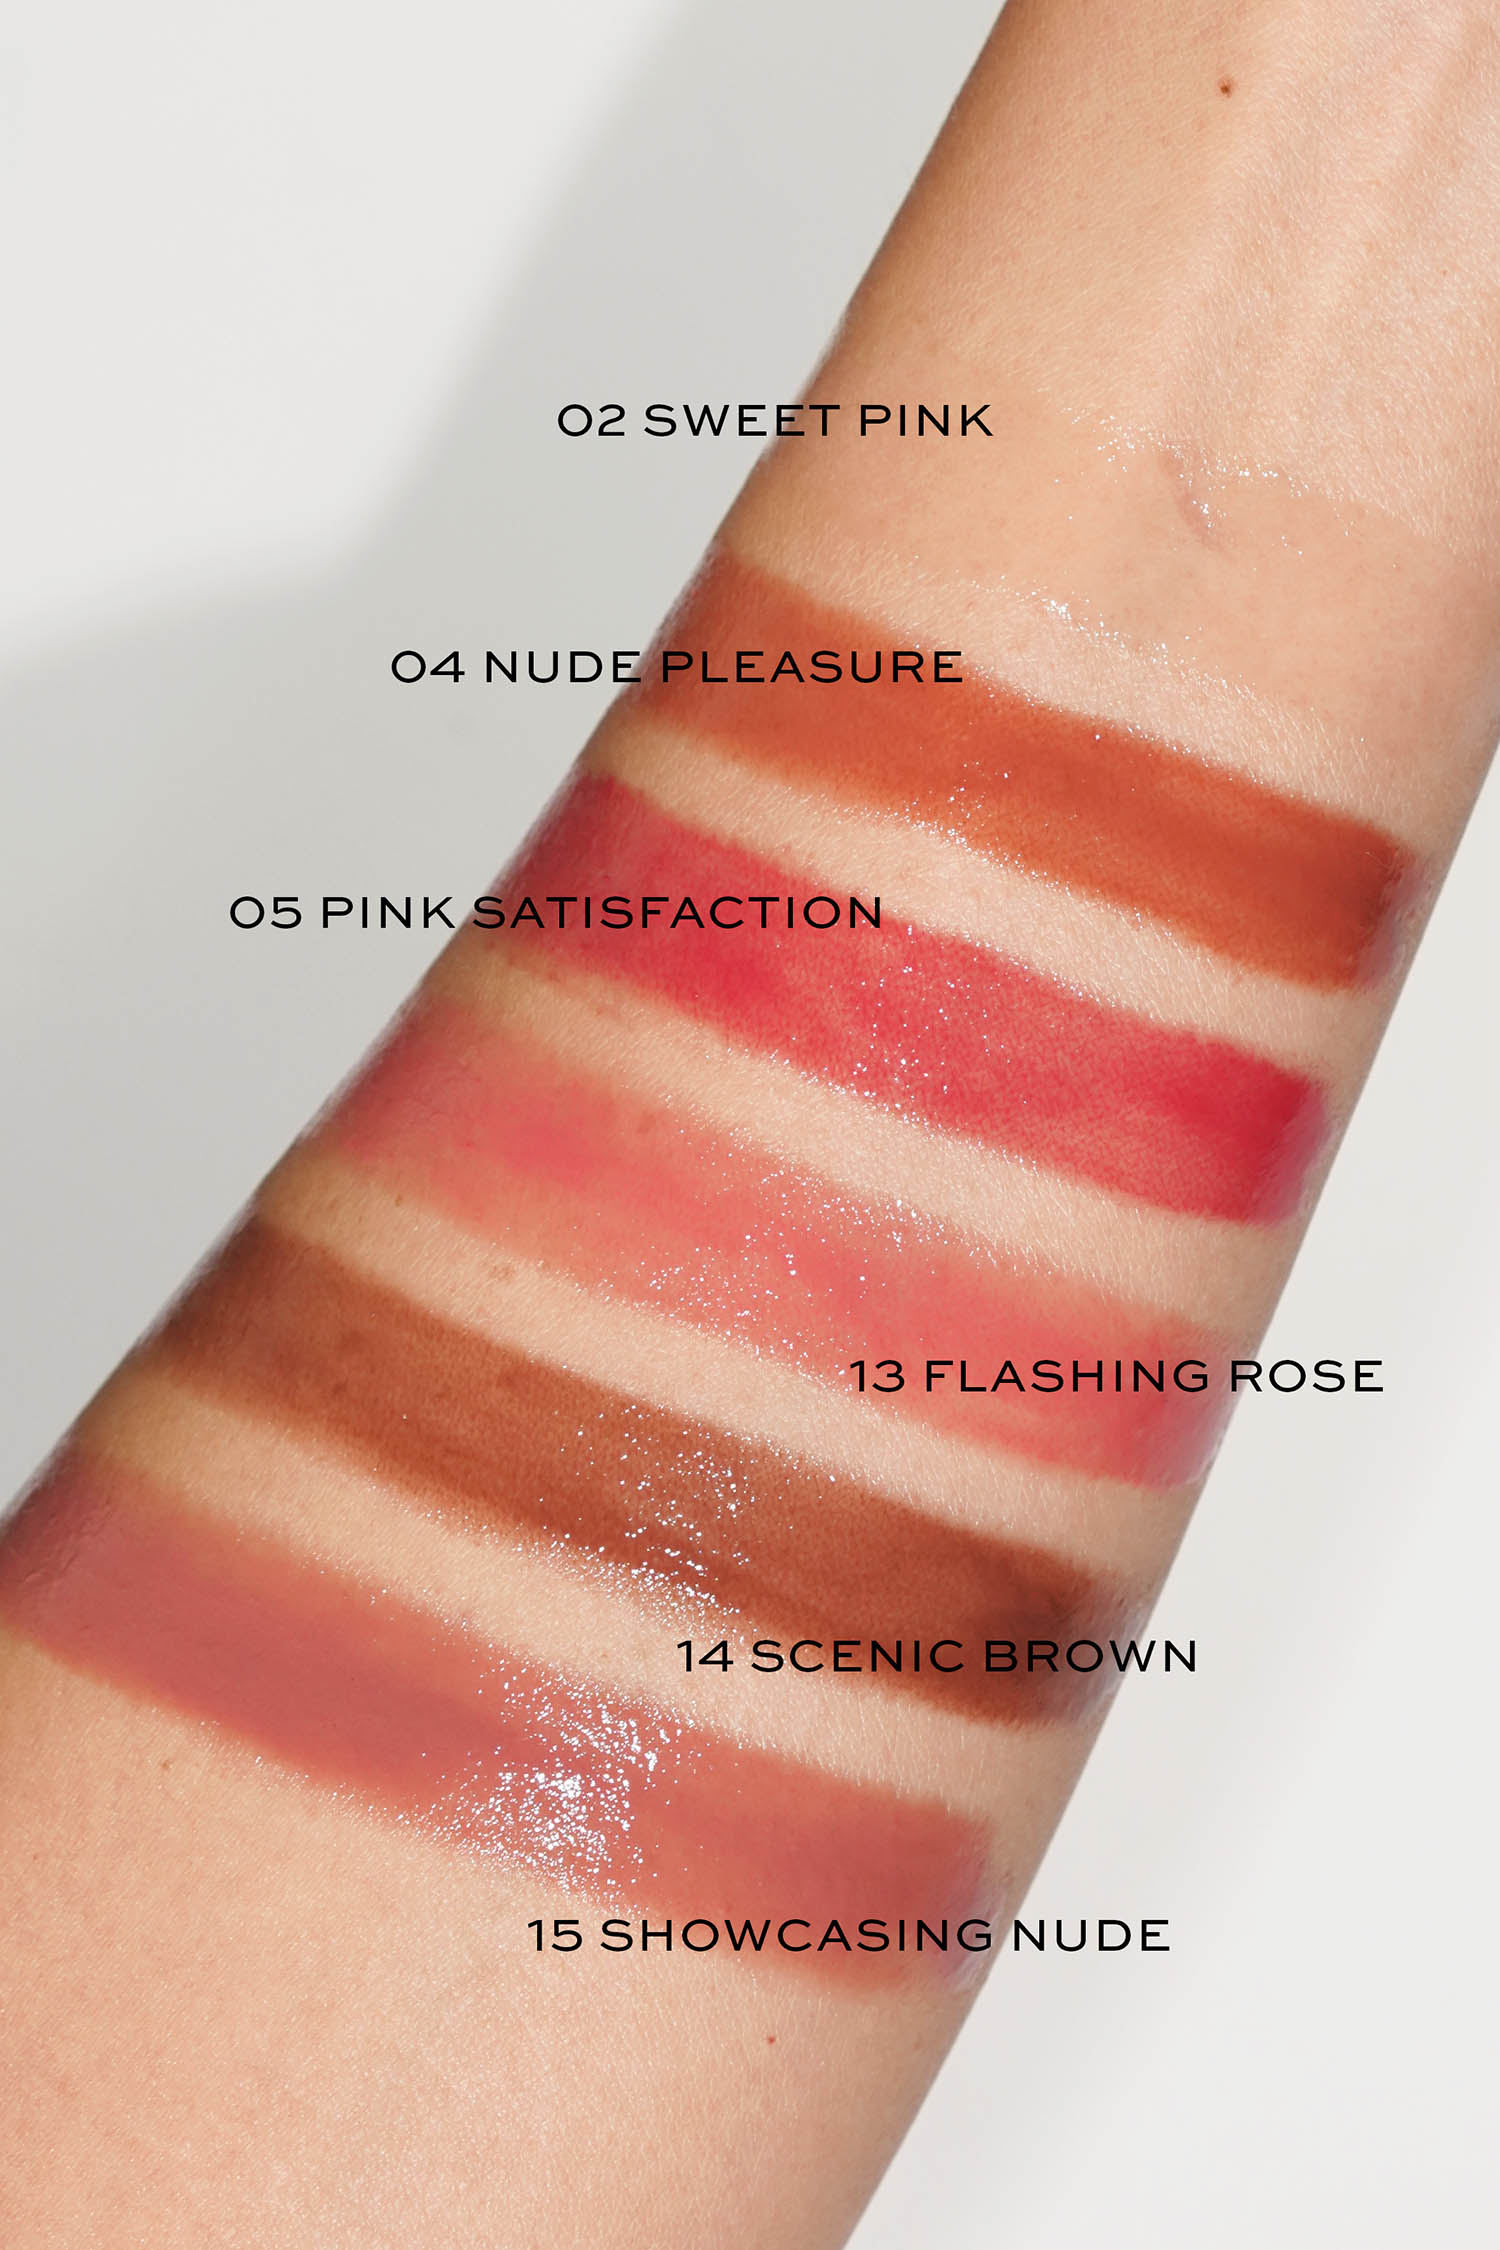 YSL Flashing Rose (13) Candy Glaze Lip Gloss Stick Review & Swatches